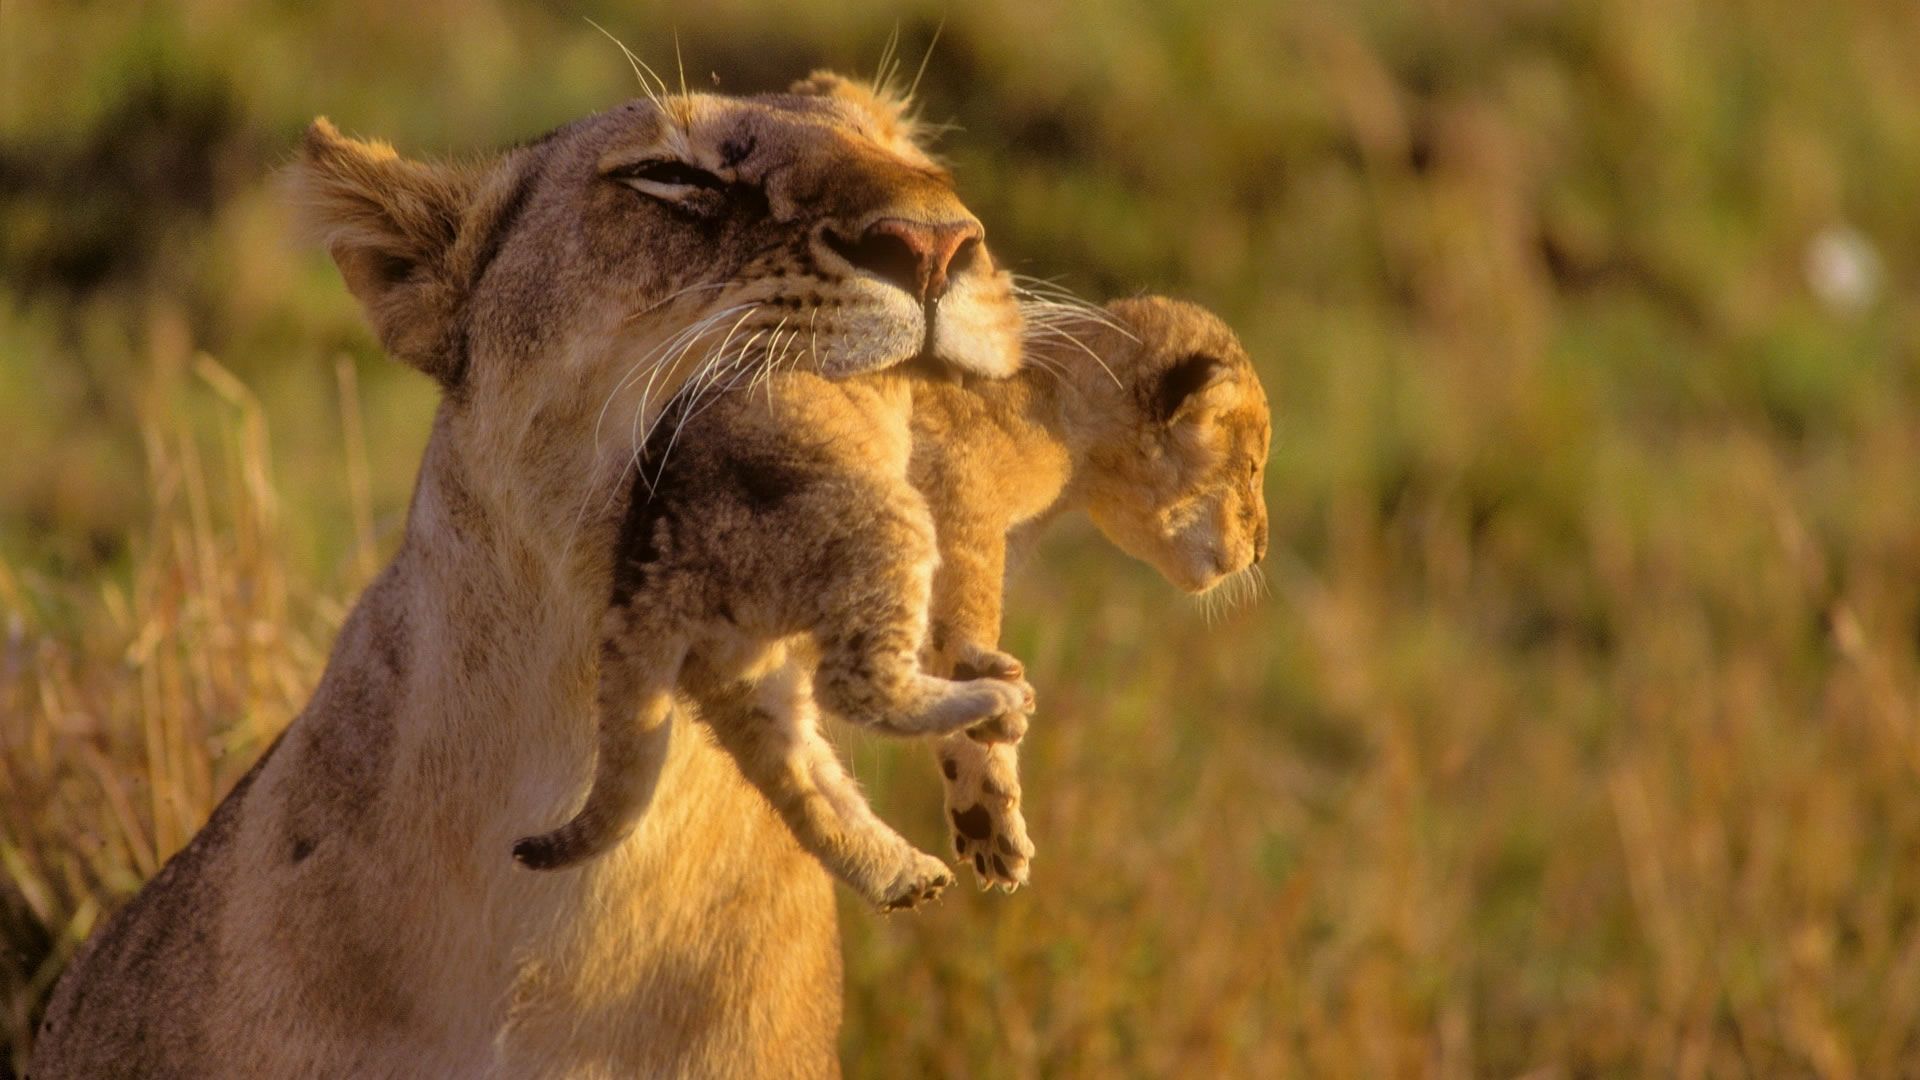 Amazing Mother Lion And Her Baby Wallpaper. Animals beautiful